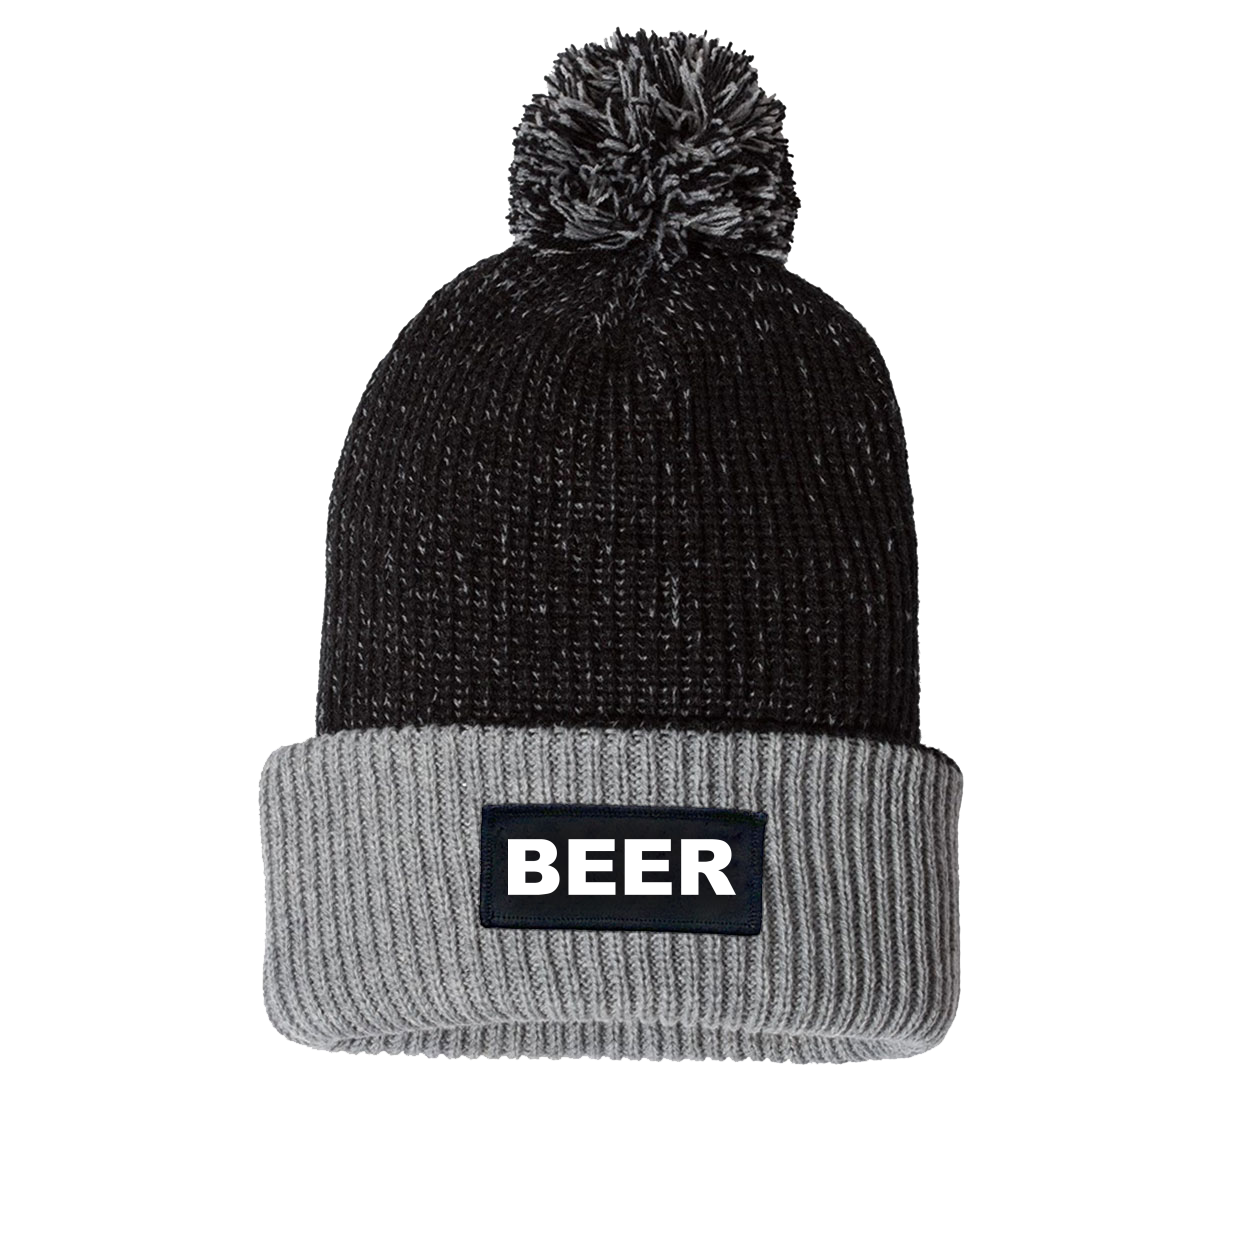 Beer Brand Logo Night Out Woven Patch Roll Up Pom Knit Beanie Black/Gray